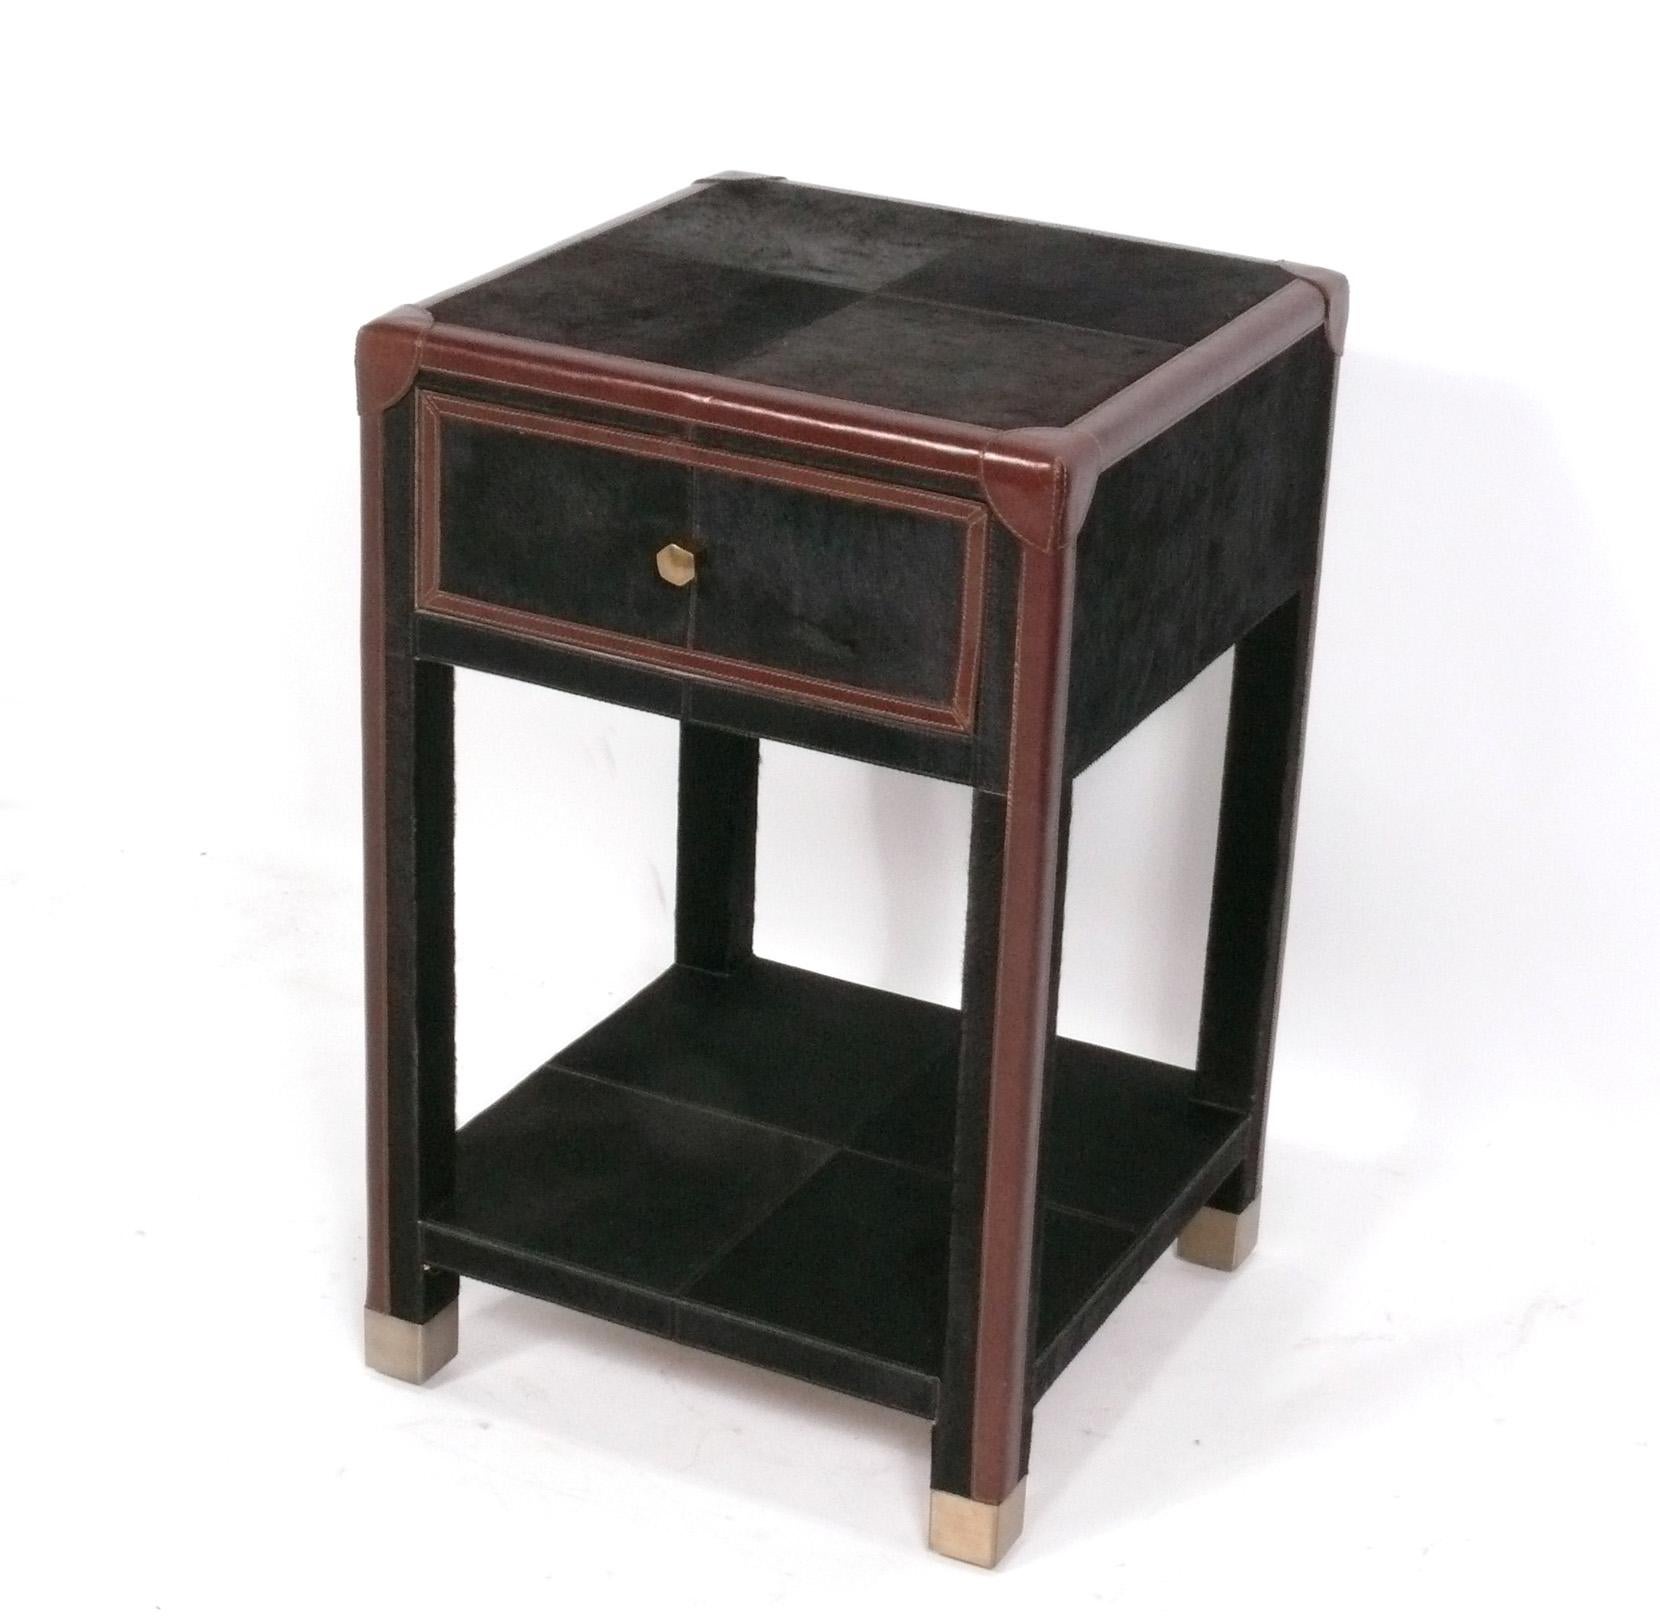 Elegant cowhide and leather nightstand, by Made Goods, American, circa 2020s. Original retail price $2400. This piece is a versatile size and can be used as a nightstand, end, or side table. It is constructed of hair on hide cowhide, leather, and